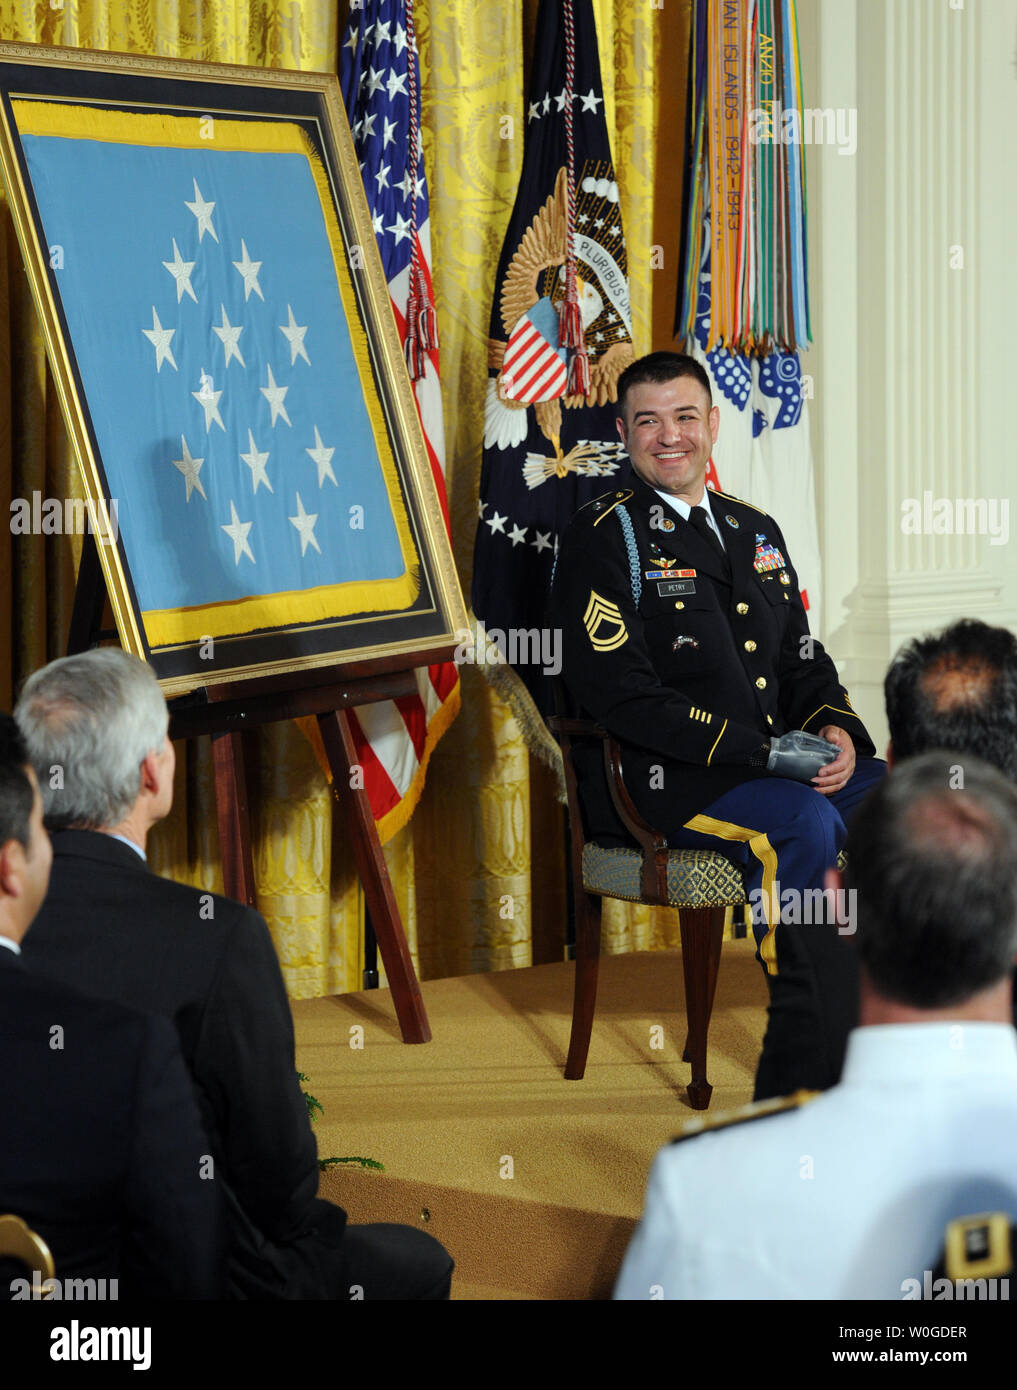 File:Flickr - The U.S. Army - Medal of Honor, Sgt- 1st Class Leroy